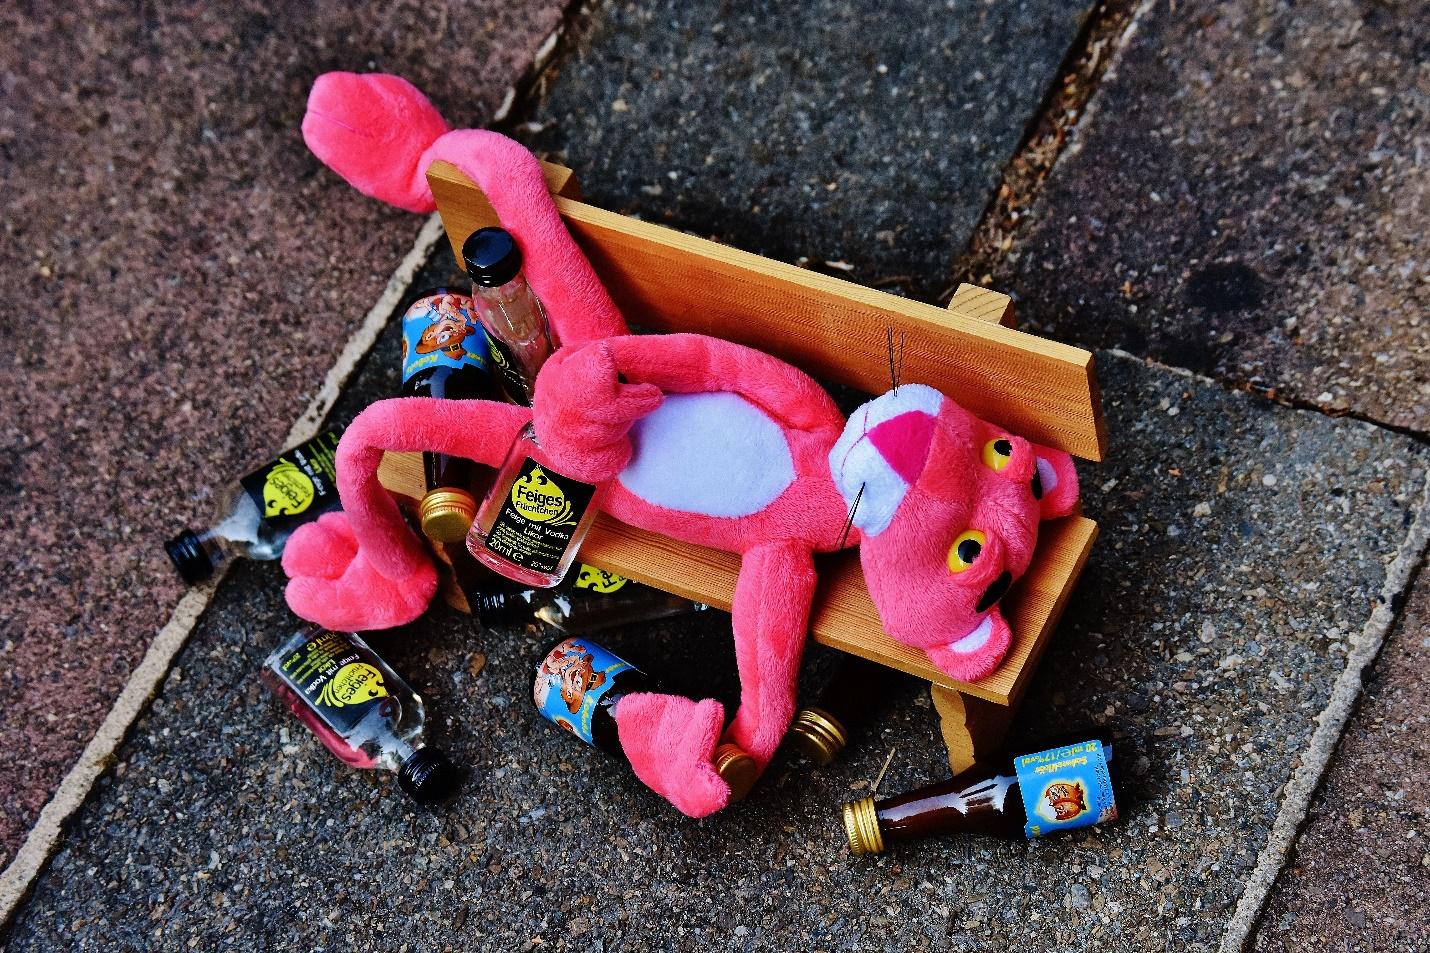 Pink Panther used to enact the behavior of an alcoholic